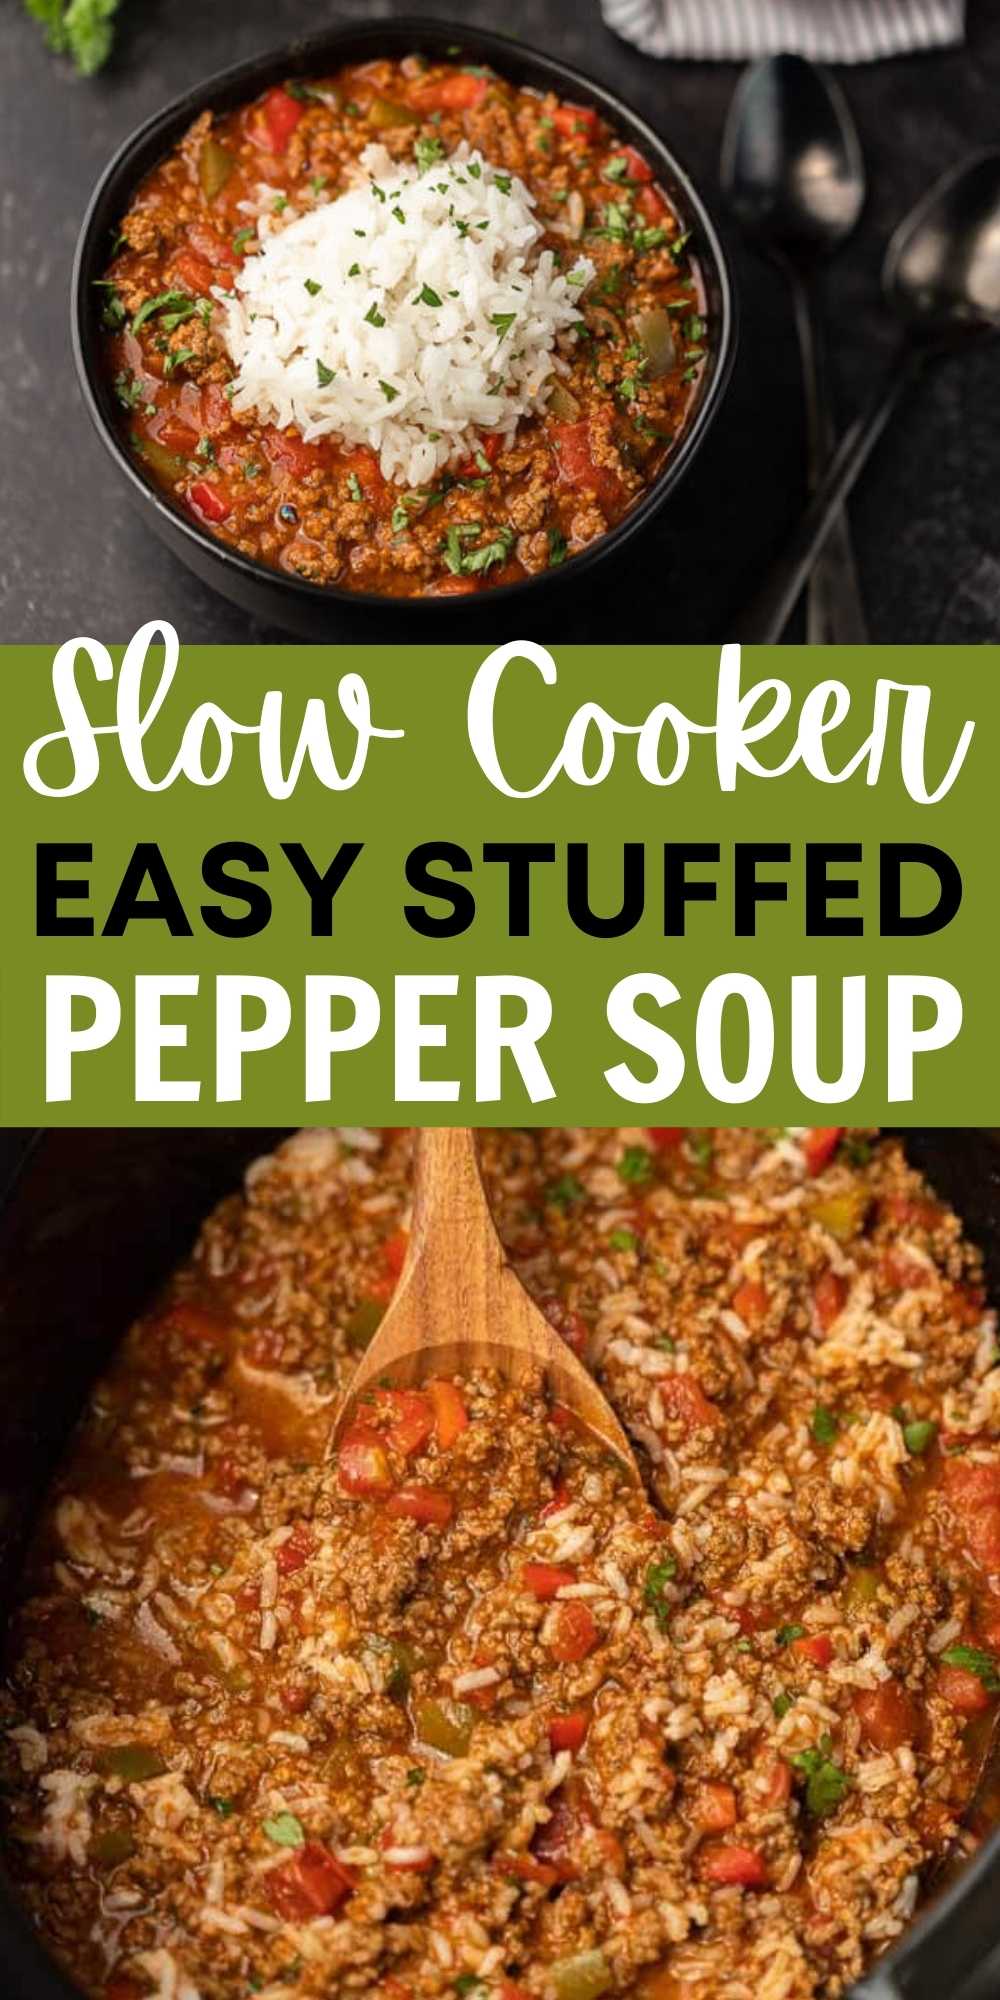 Crockpot Stuffed Pepper Soup is so easy to make and tastes delicious too. You will love this stuffed pepper soup crock pot recipe. The entire family loves this simple slow cooker soup recipe that is easy to throw in the crock pot and ready at dinner time! #eatingonadime #crockpotrecipes #slowcookerrecipes #souprecipes #stuffedpeppersoup
